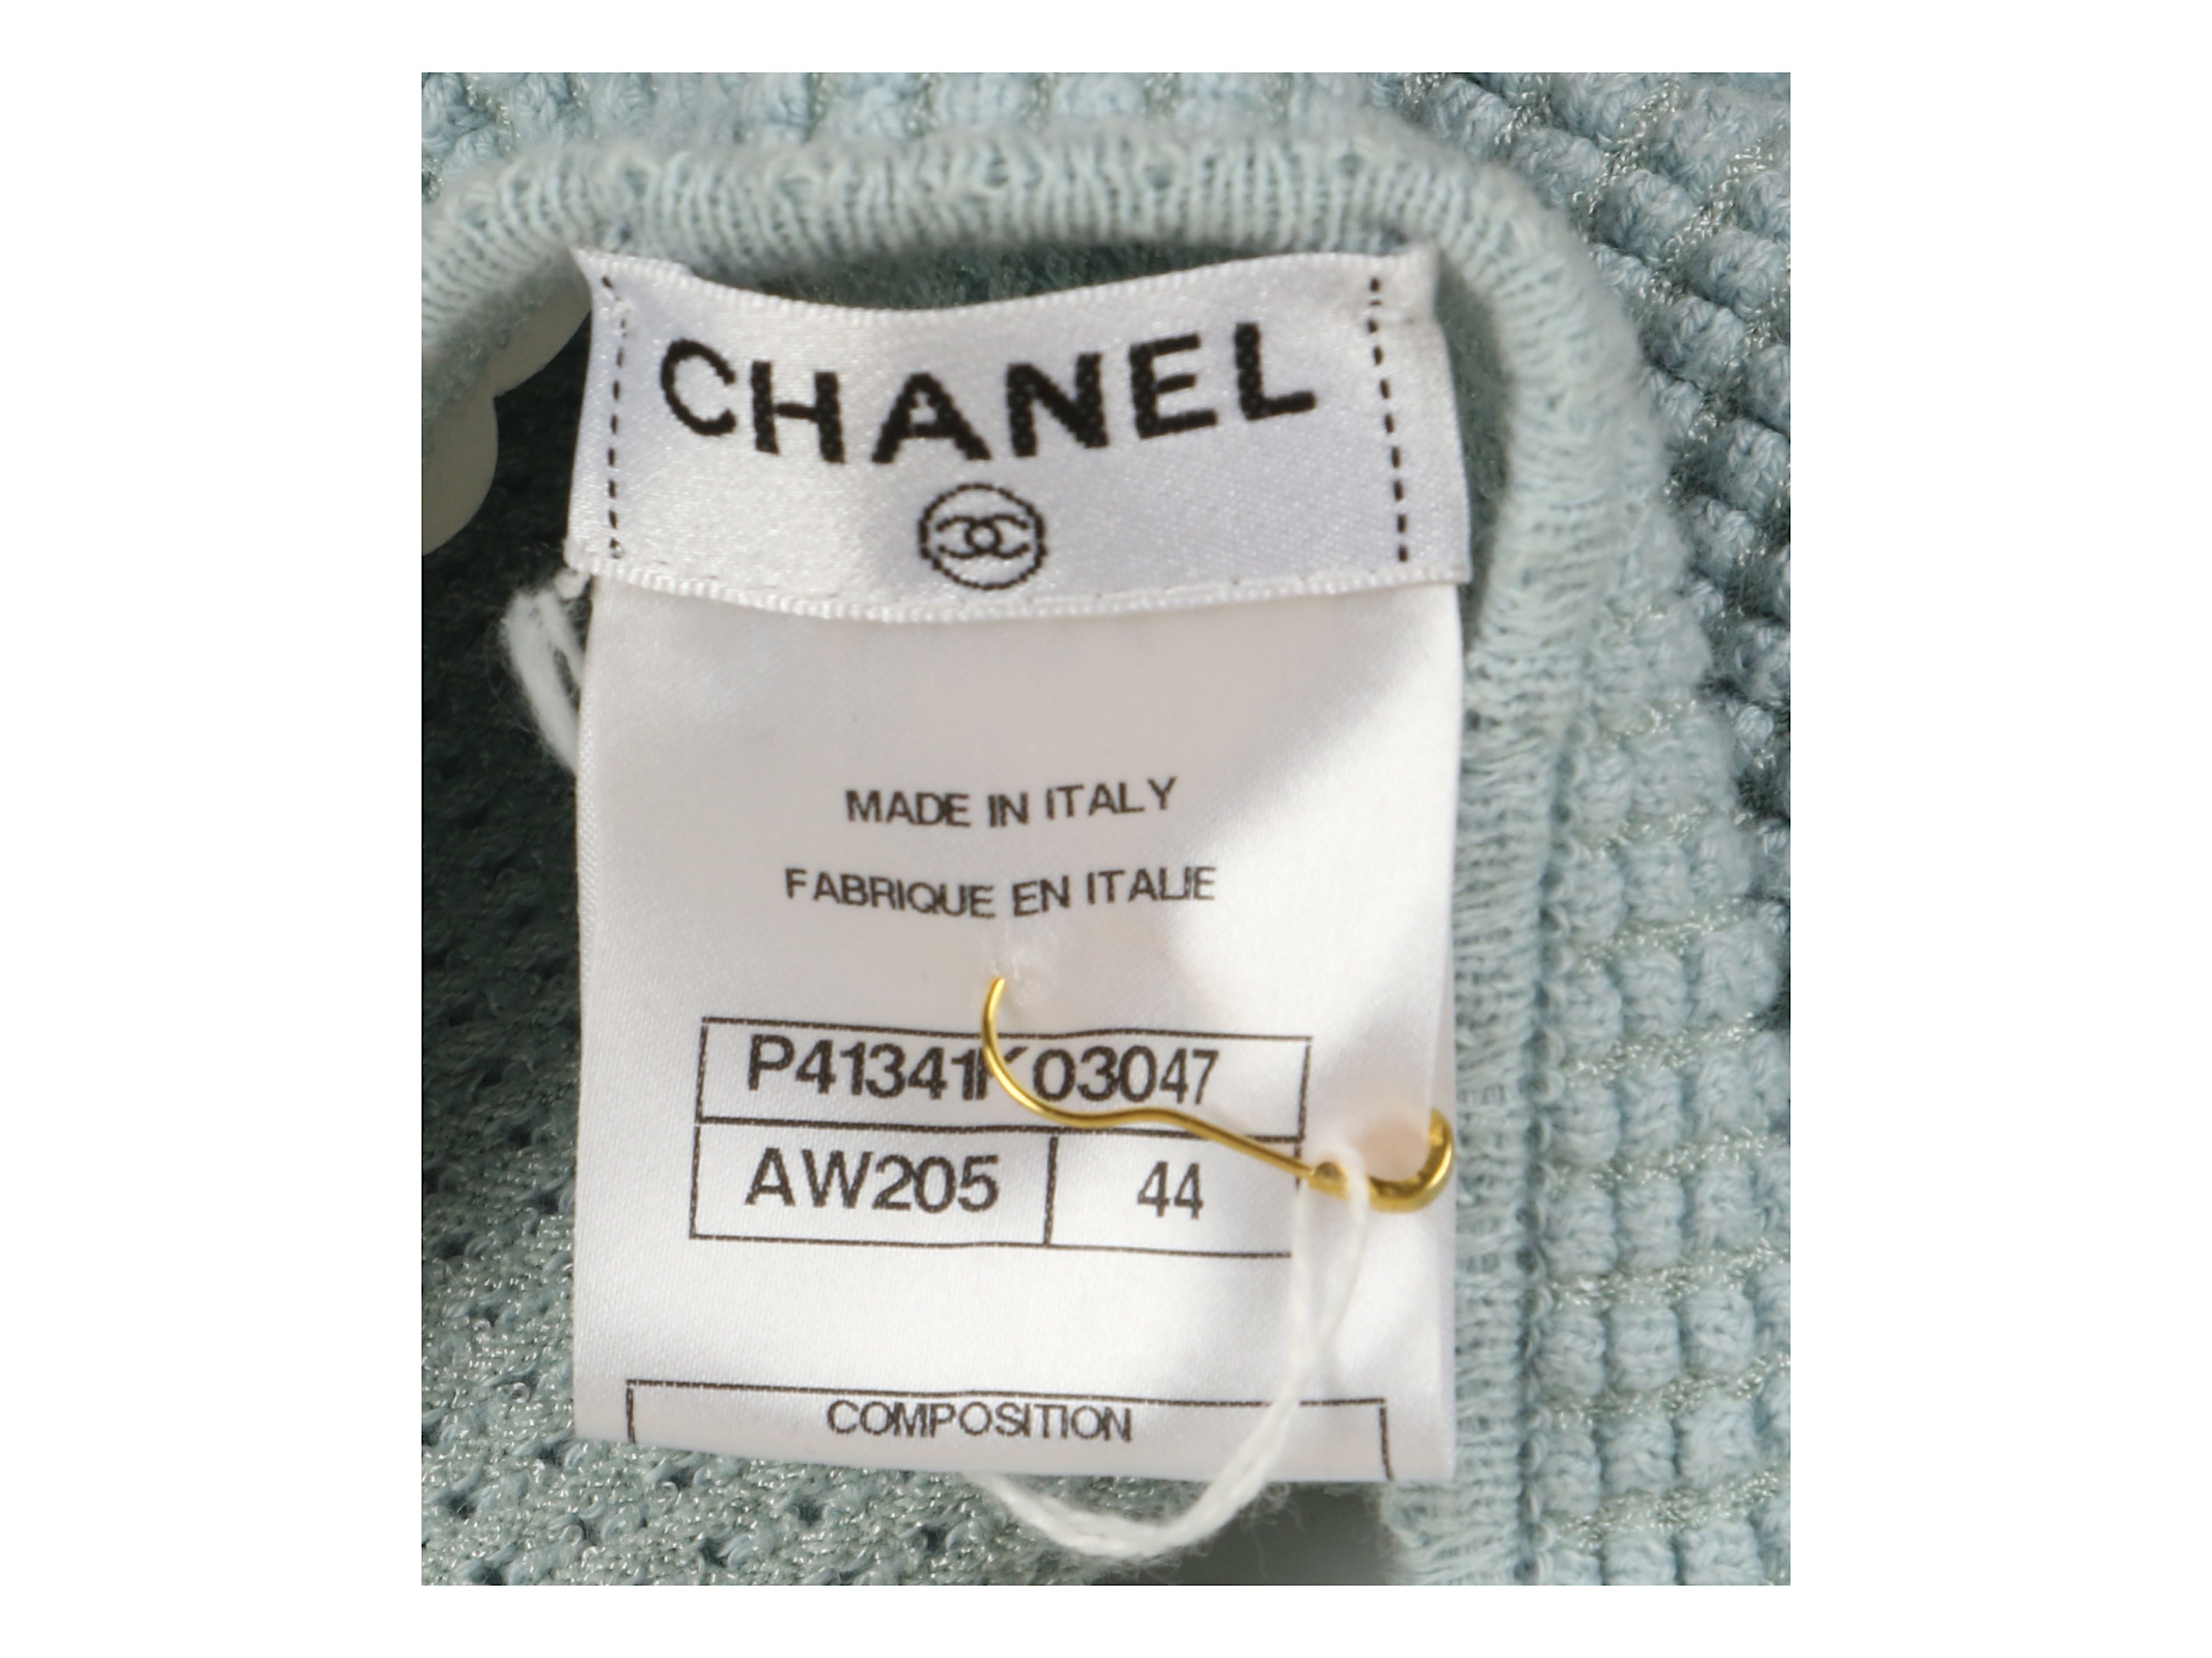 Chanel Baby Blue Crochet Top, 2010s, cotton body with crochet neckline and asymmetrical hem, - Image 6 of 6